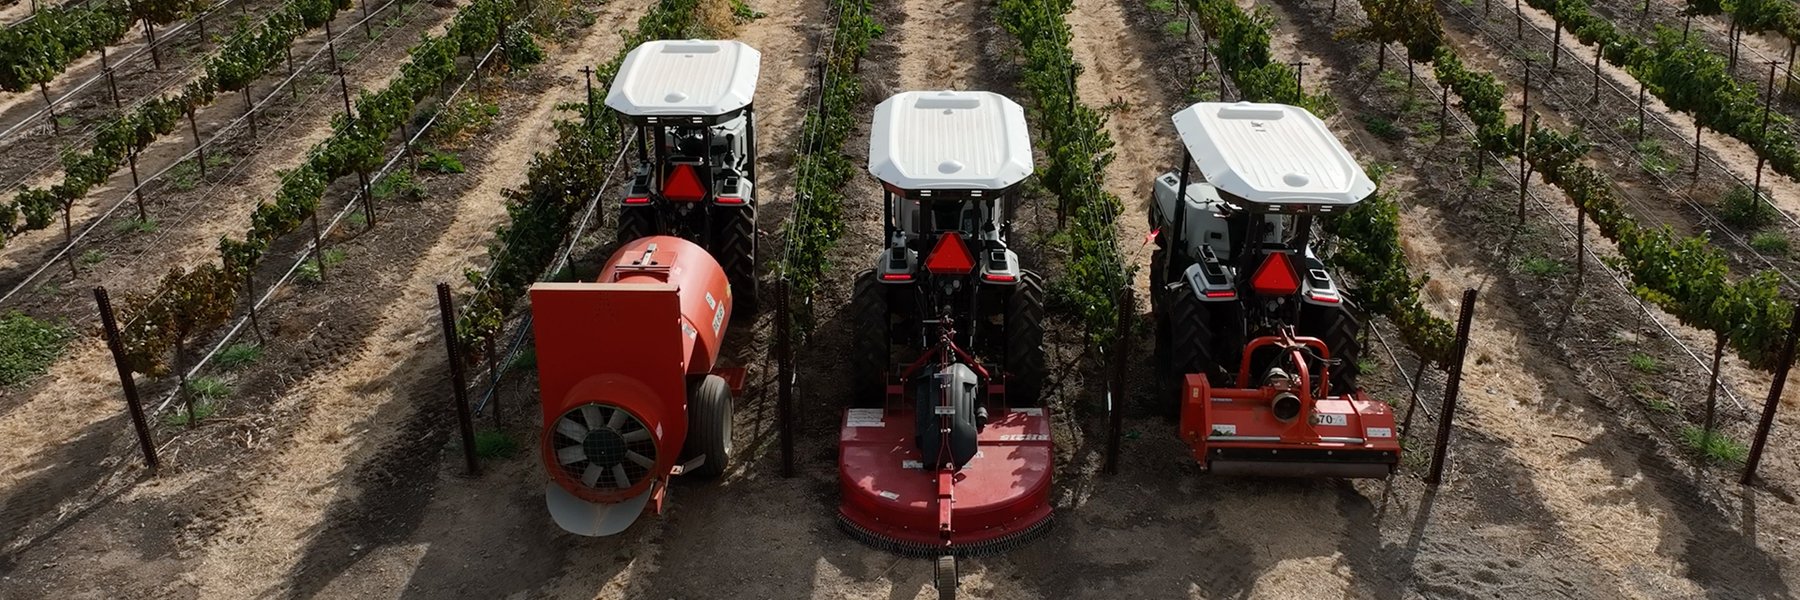 Electric tractor implements